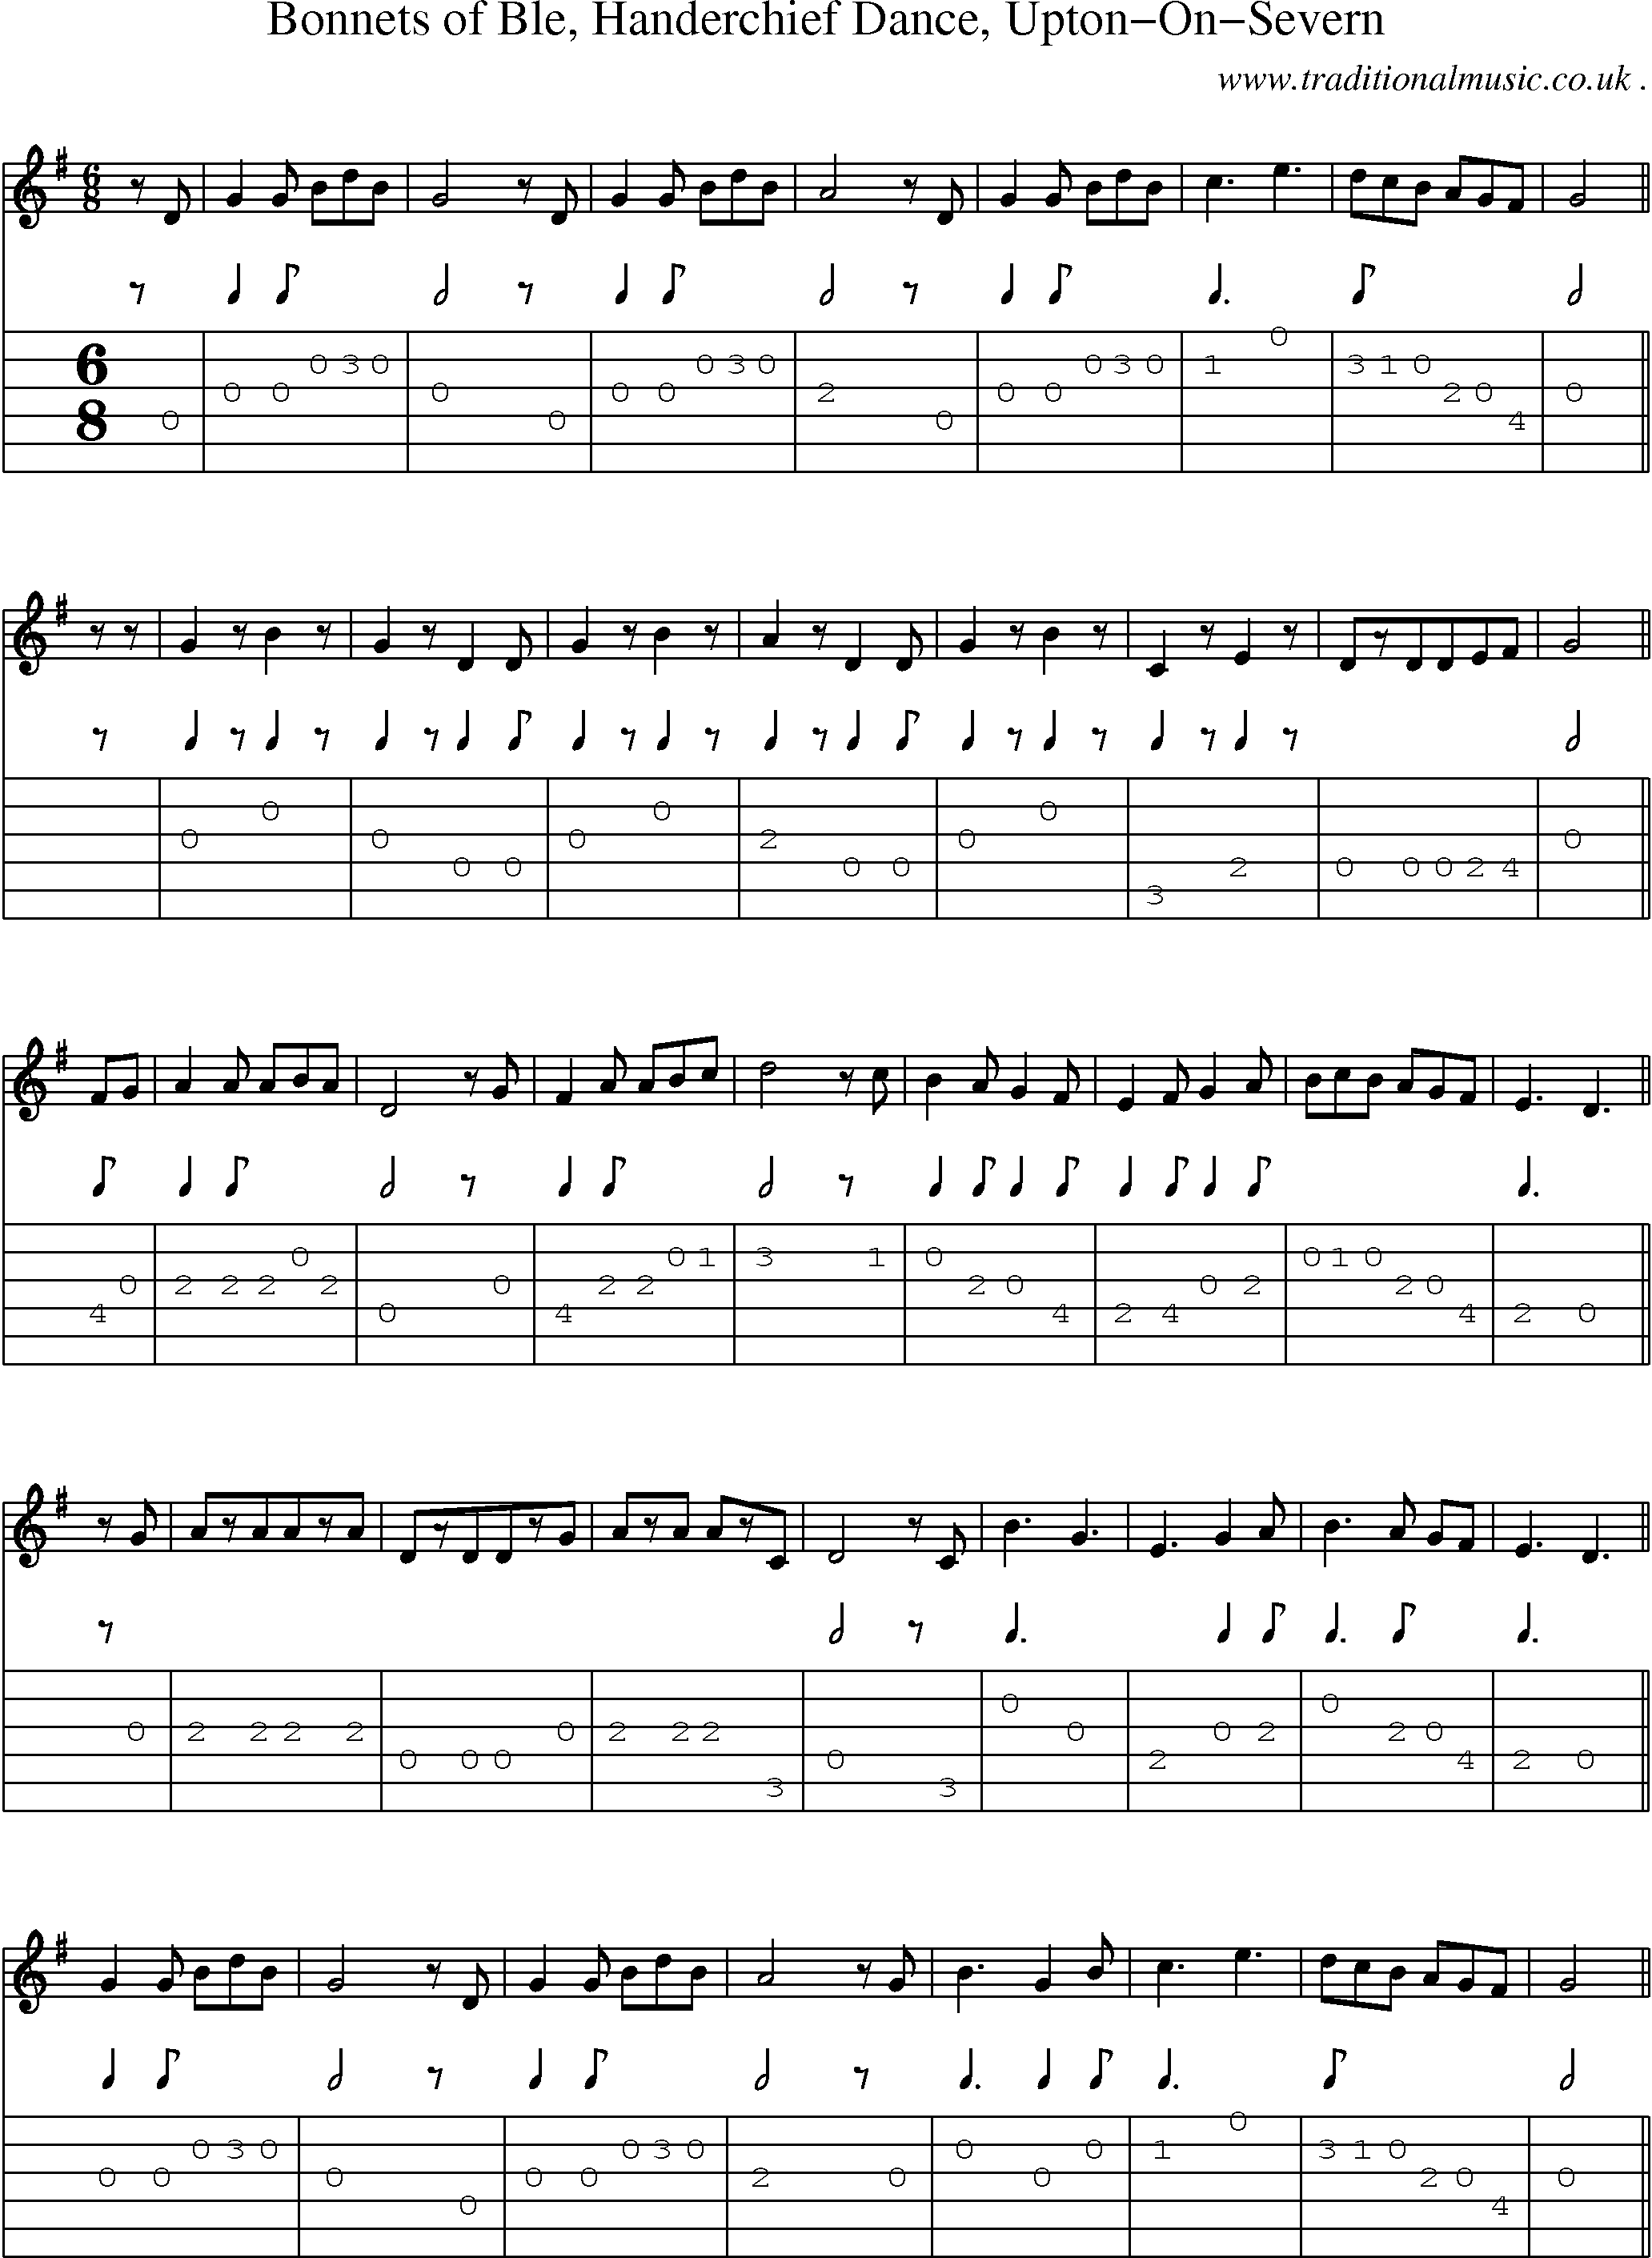 Sheet-Music and Guitar Tabs for Bonnets Of Ble Handerchief Dance Upton-on-severn